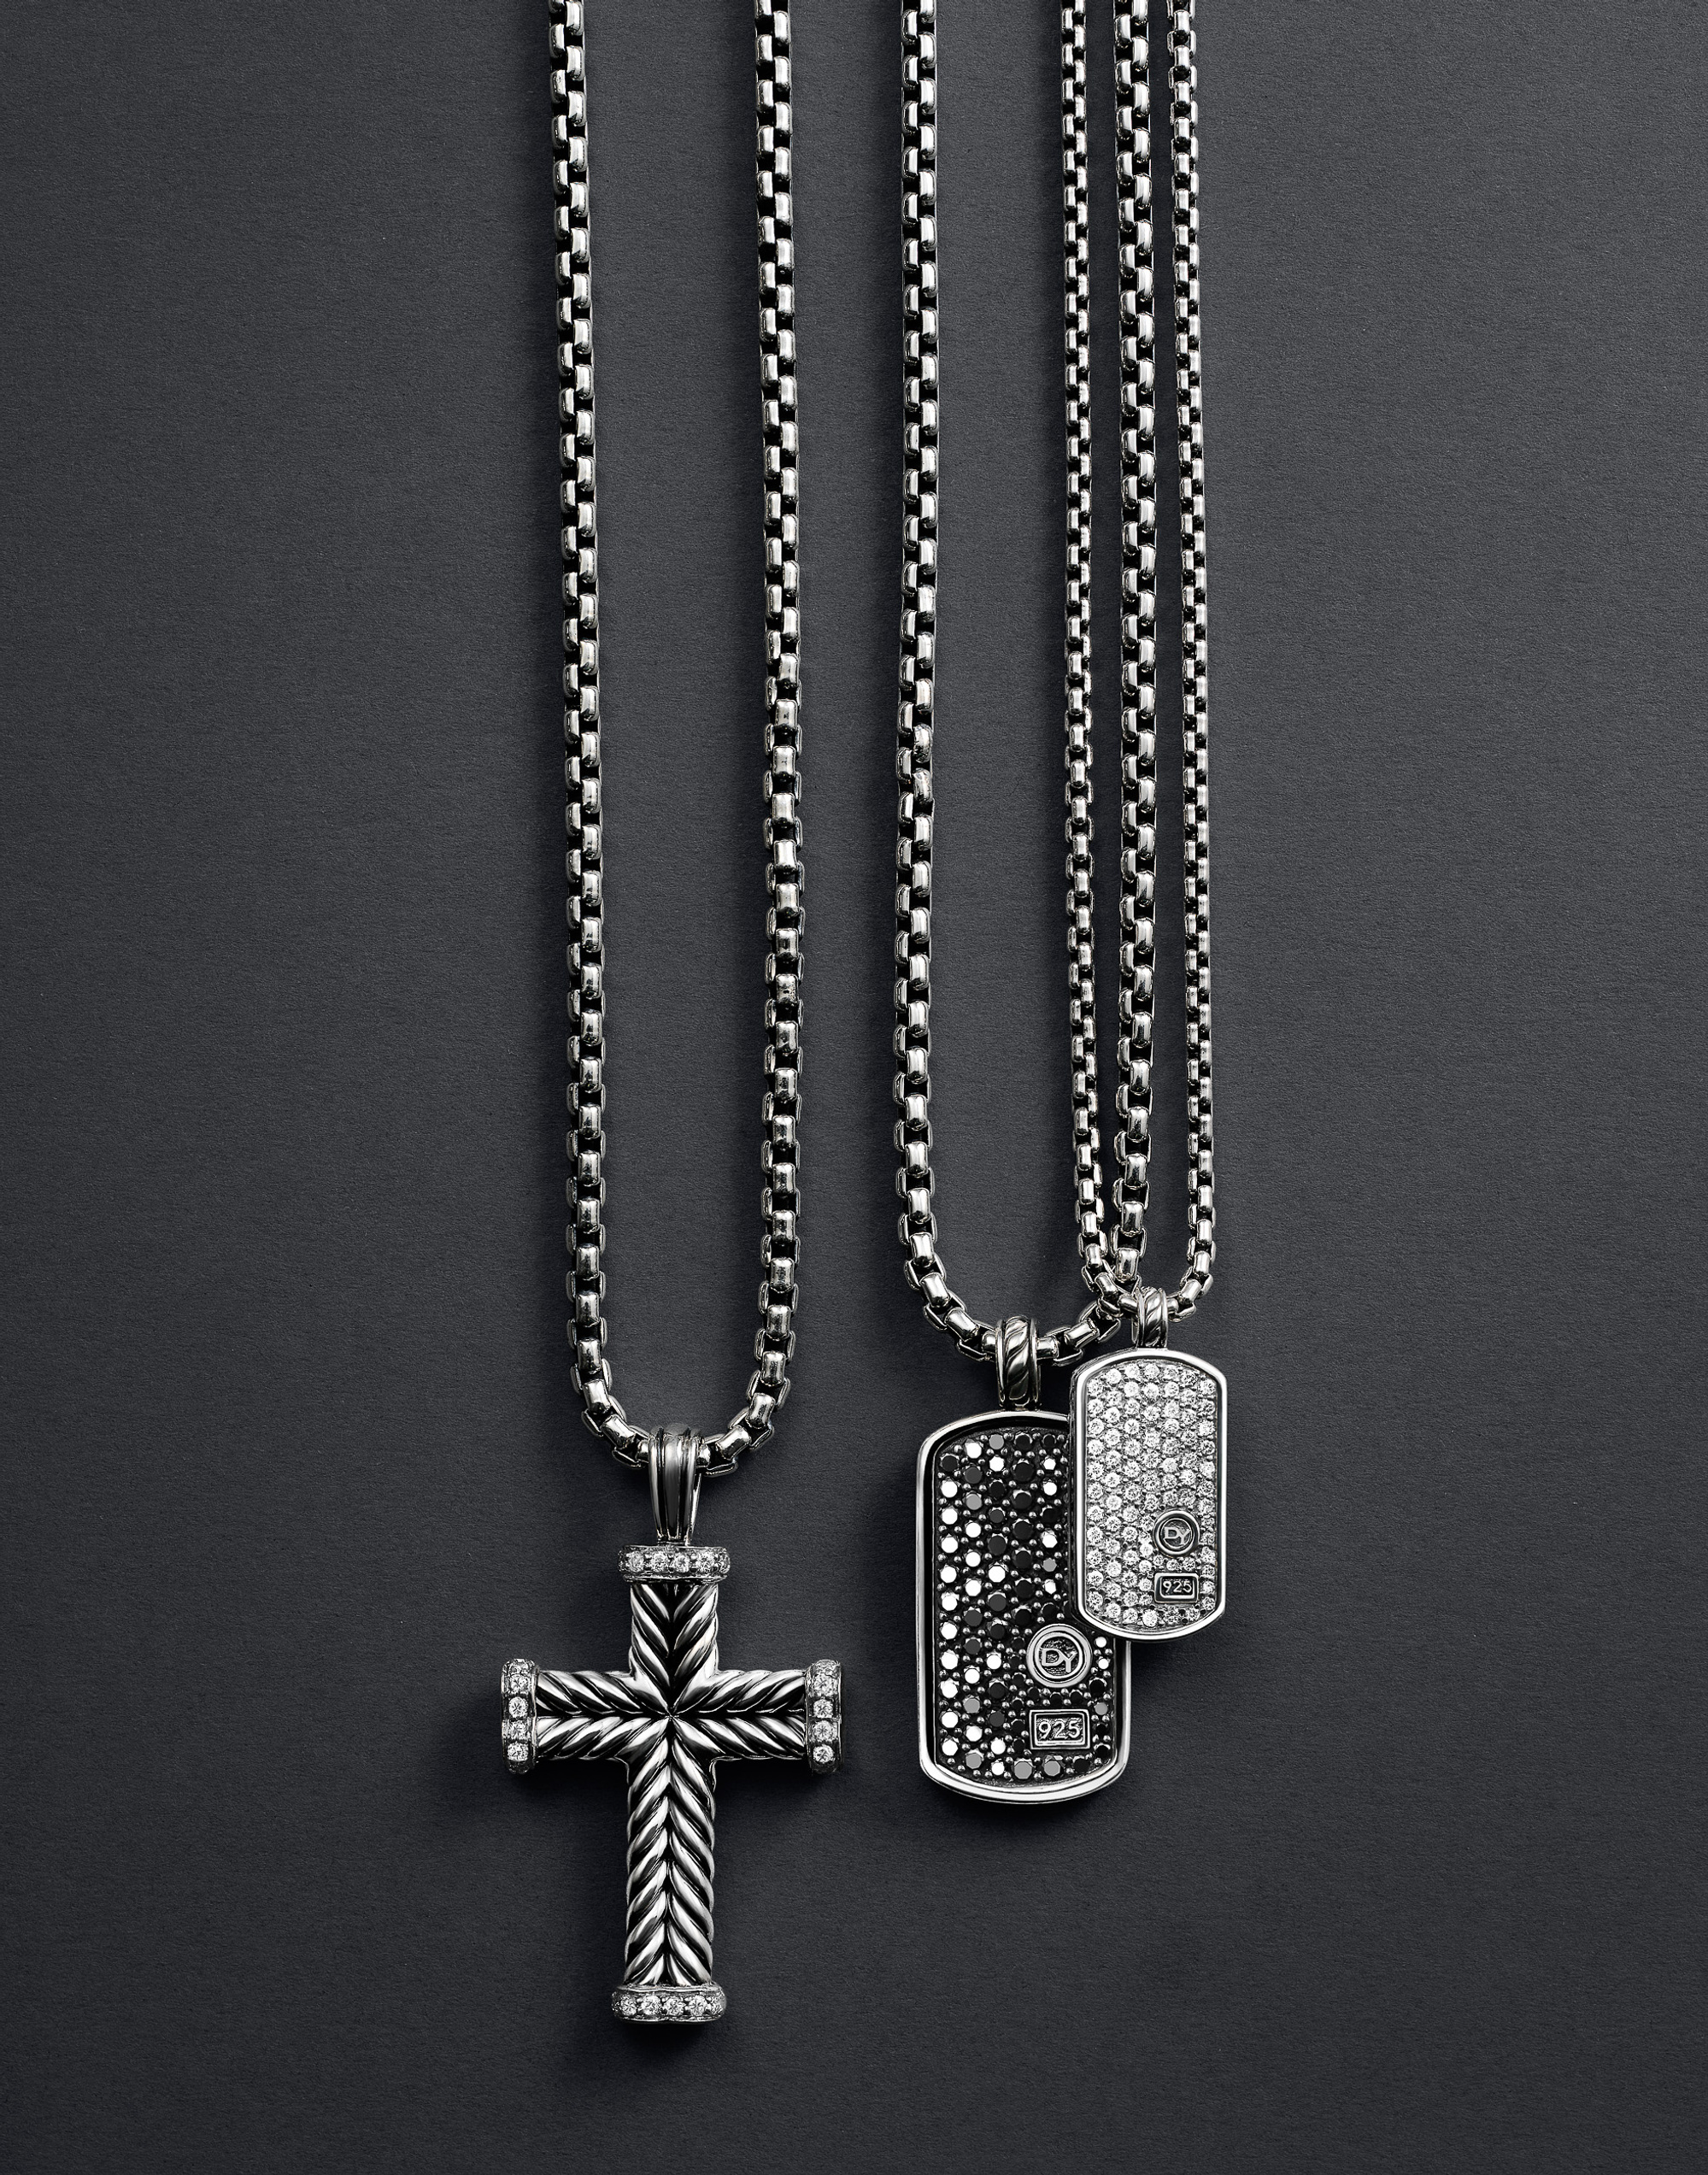 David Yurman Jewelry photography by commercial product & advertising photographer Timothy Hogan in the Los Angeles studio